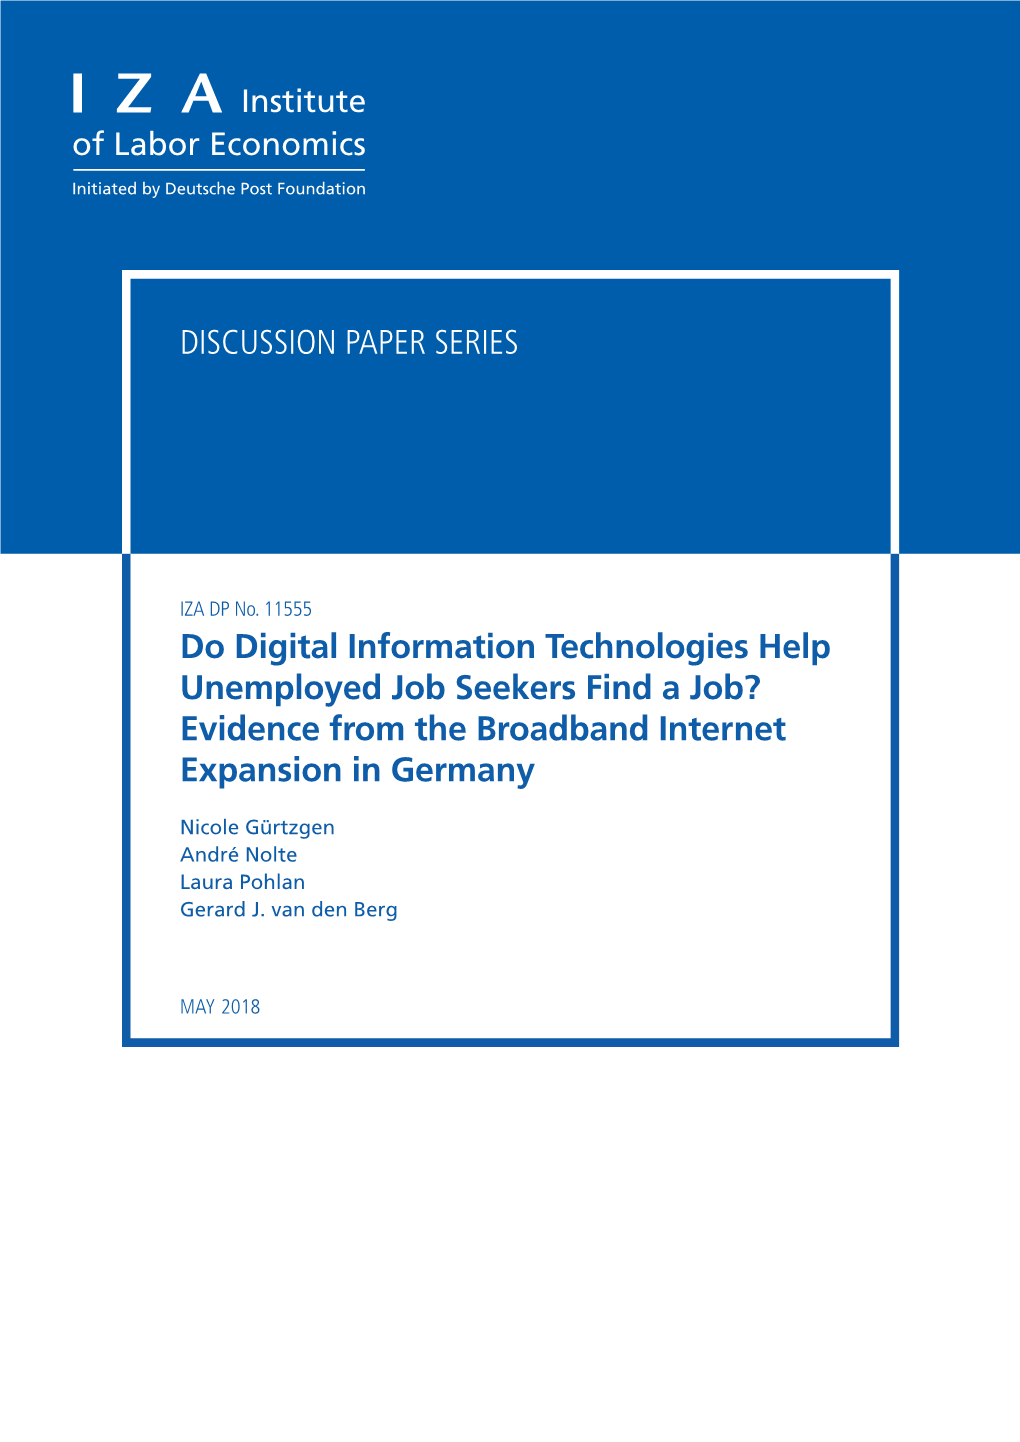 Do Digital Information Technologies Help Unemployed Job Seekers Find a Job? Evidence from the Broadband Internet Expansion in Germany